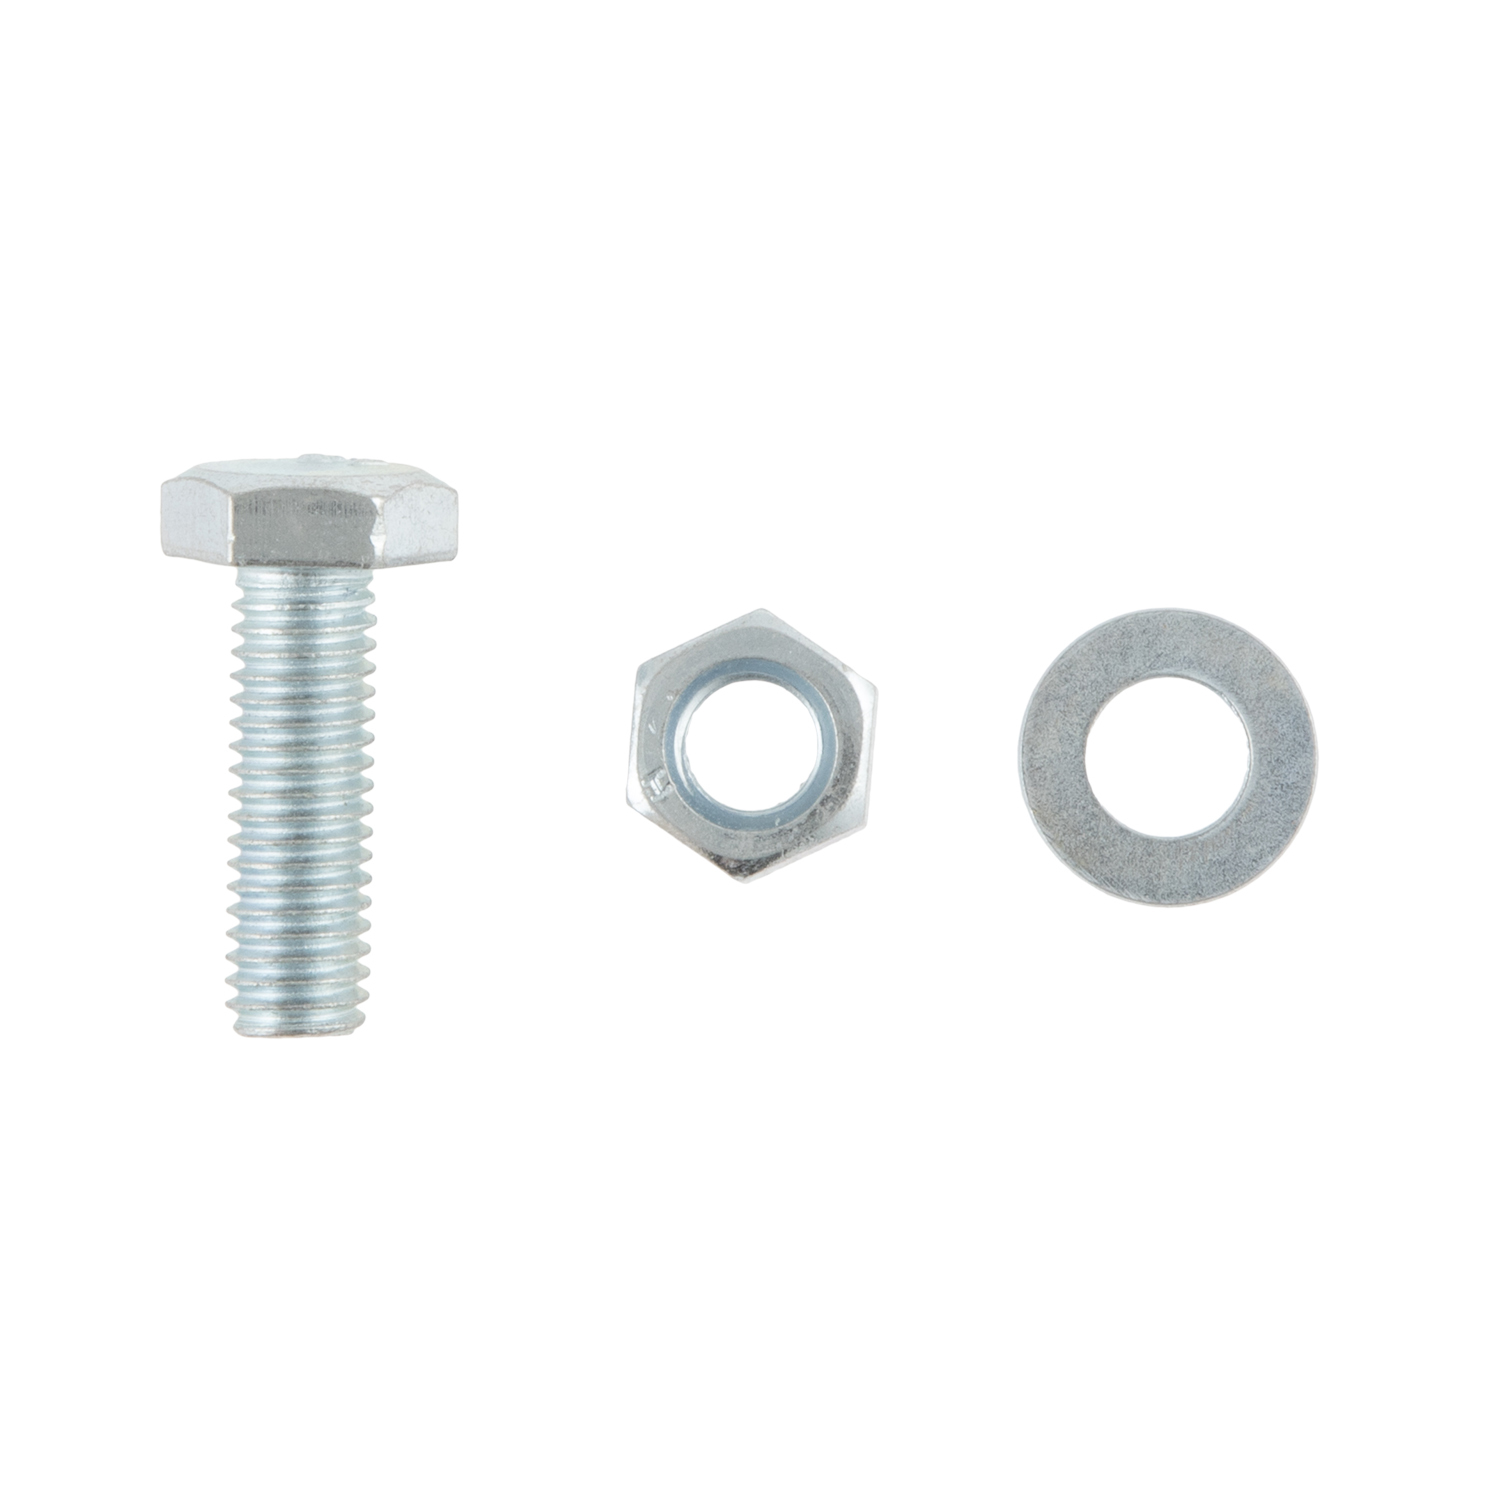 Hiatt M8 x 25mm Hex Bolt Nut and Washer 6 Pack Image 2